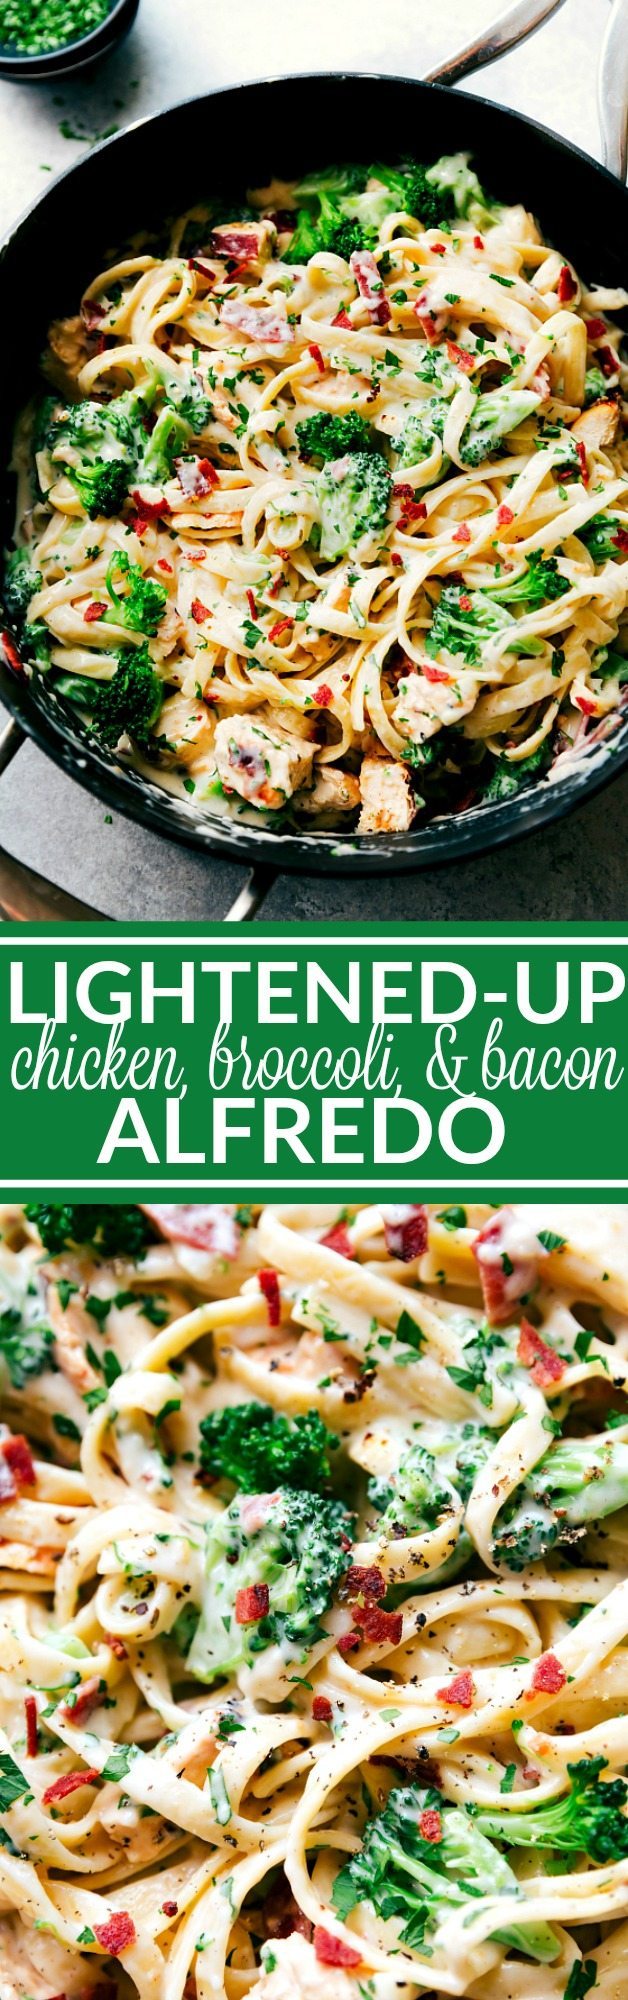 DELICIOUS SKINNY CHICKEN ALFREDO- A delicious and rich chicken broccoli Alfredo with bacon that is secretly lightened-up. Half the calories, all the great flavors! Recipe from chelseasmessyapron.com